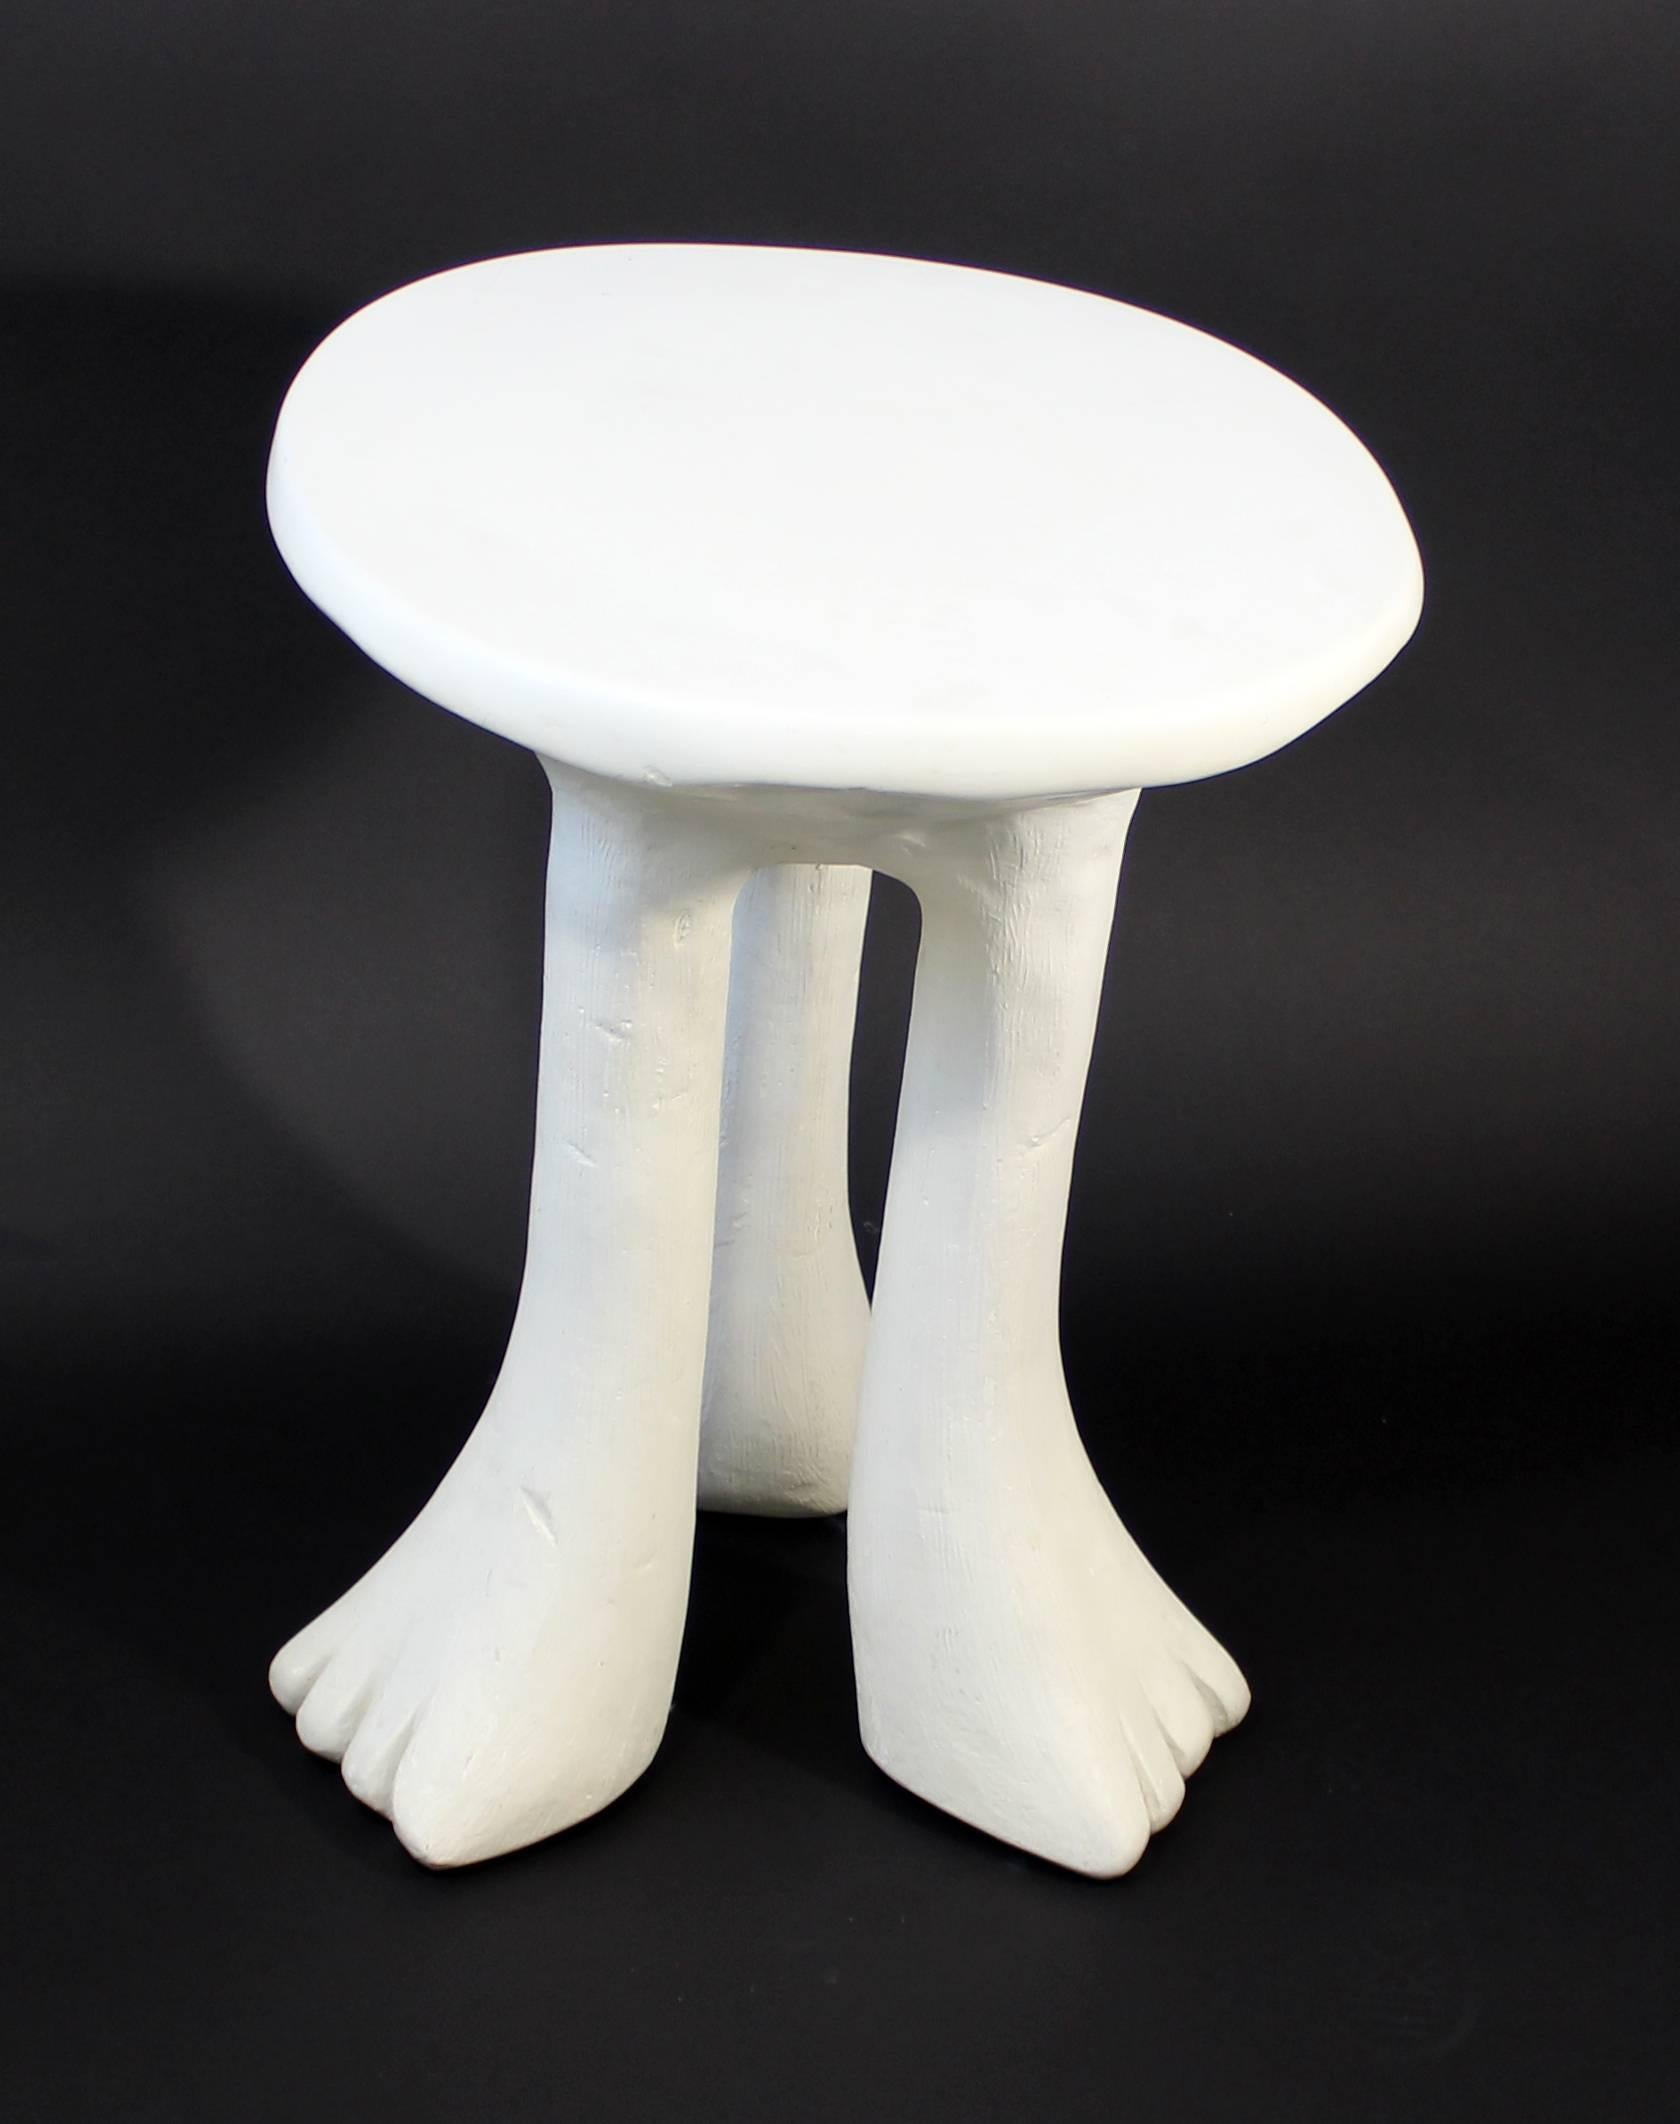 For your consideration is a fantastic piece by John Dickinson. The iconic "Africa" table, on three legs, in white plaster, circa the 1970s. In great condition. The dimensions are 16" diameter x 20" height.